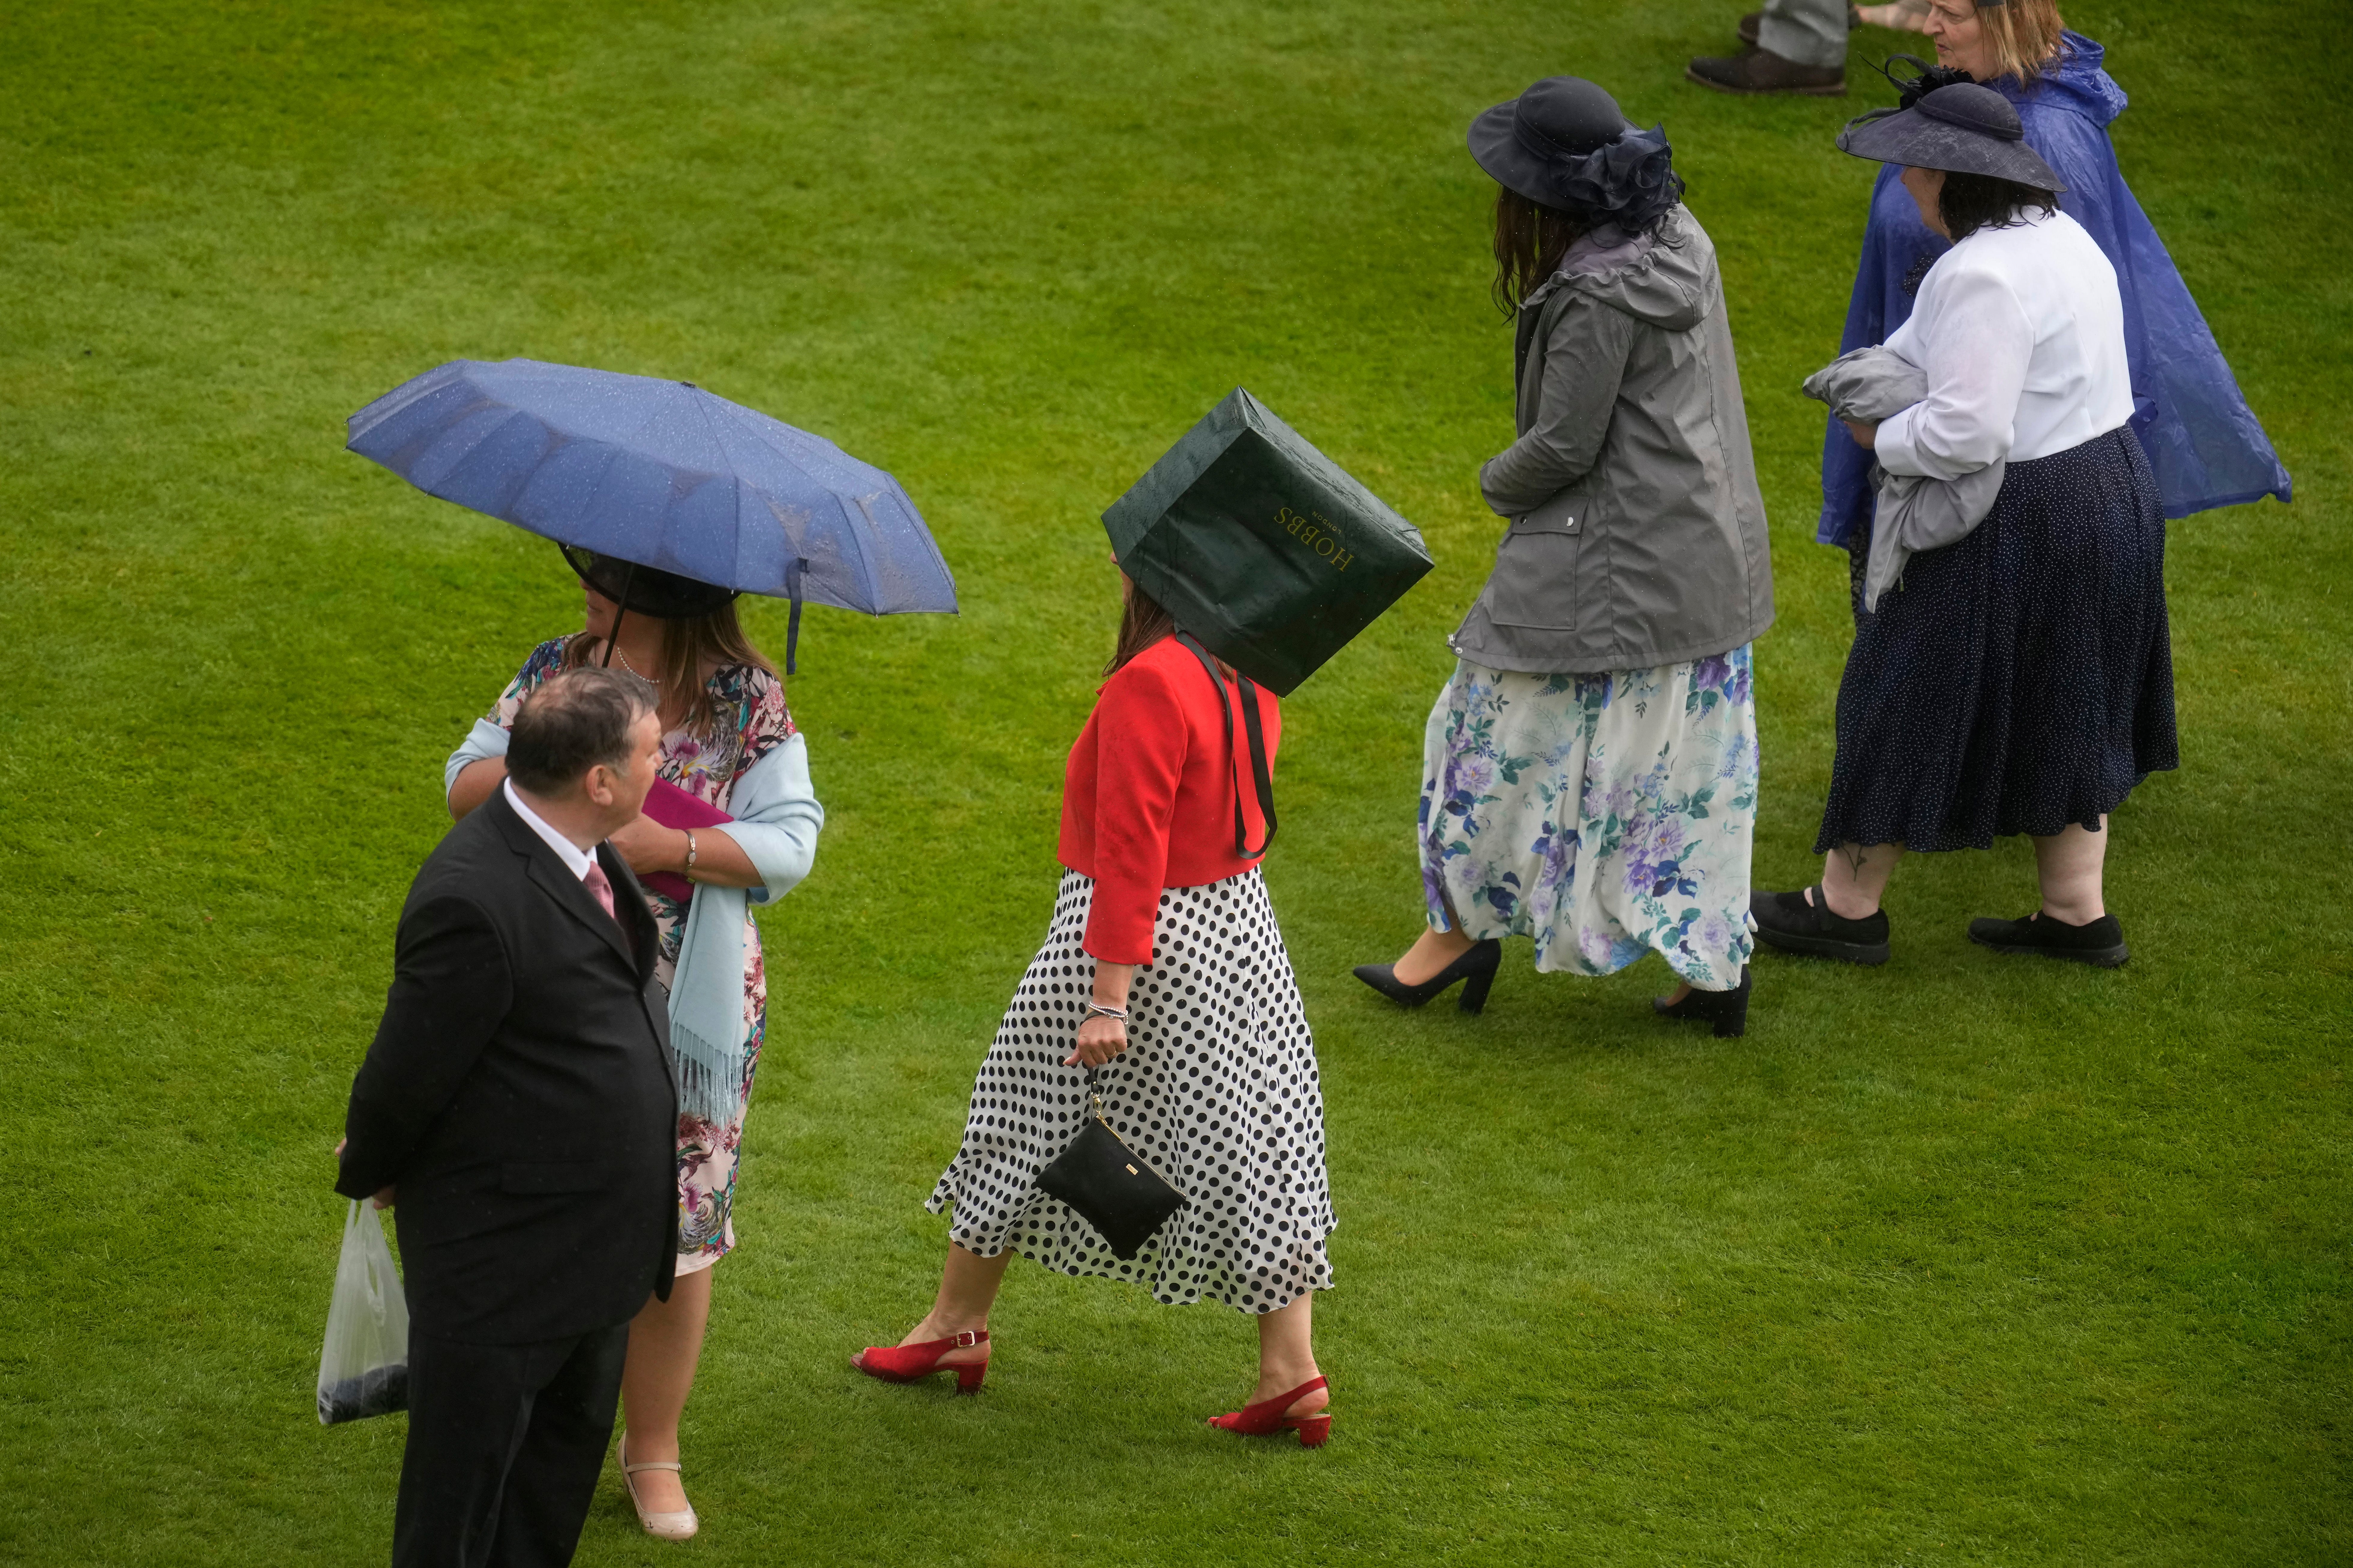 Rain likely over the weekend. Pictured: Garden party at Buckingham Palace on Wednesday